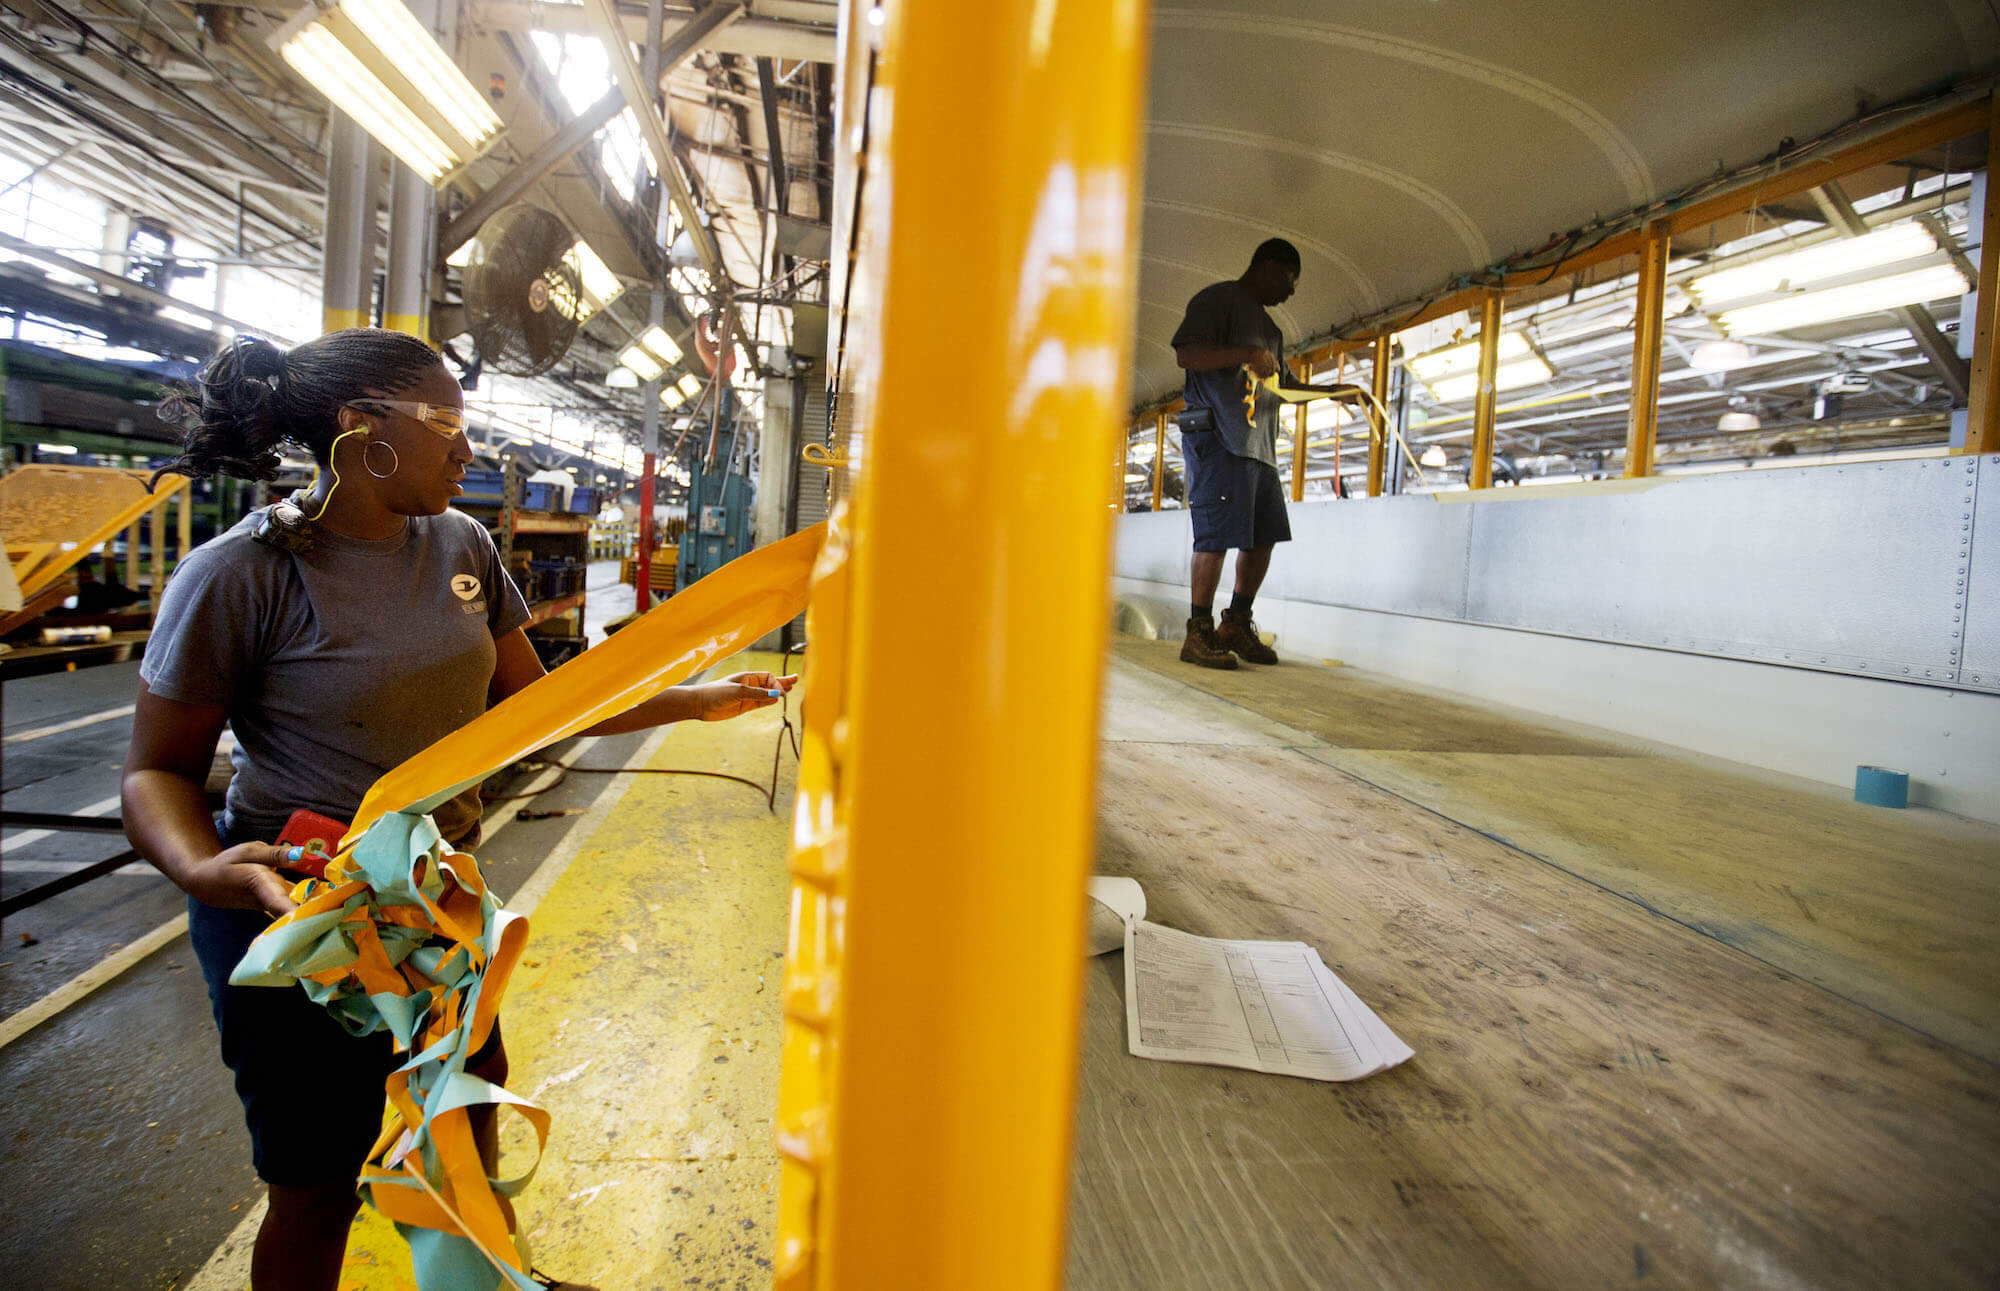 Employees work on a school bus on the assembly line at Blue Bird Corporation’s manufacturing facility in Fort Valley, Ga. (AP Photo/David Goldman)